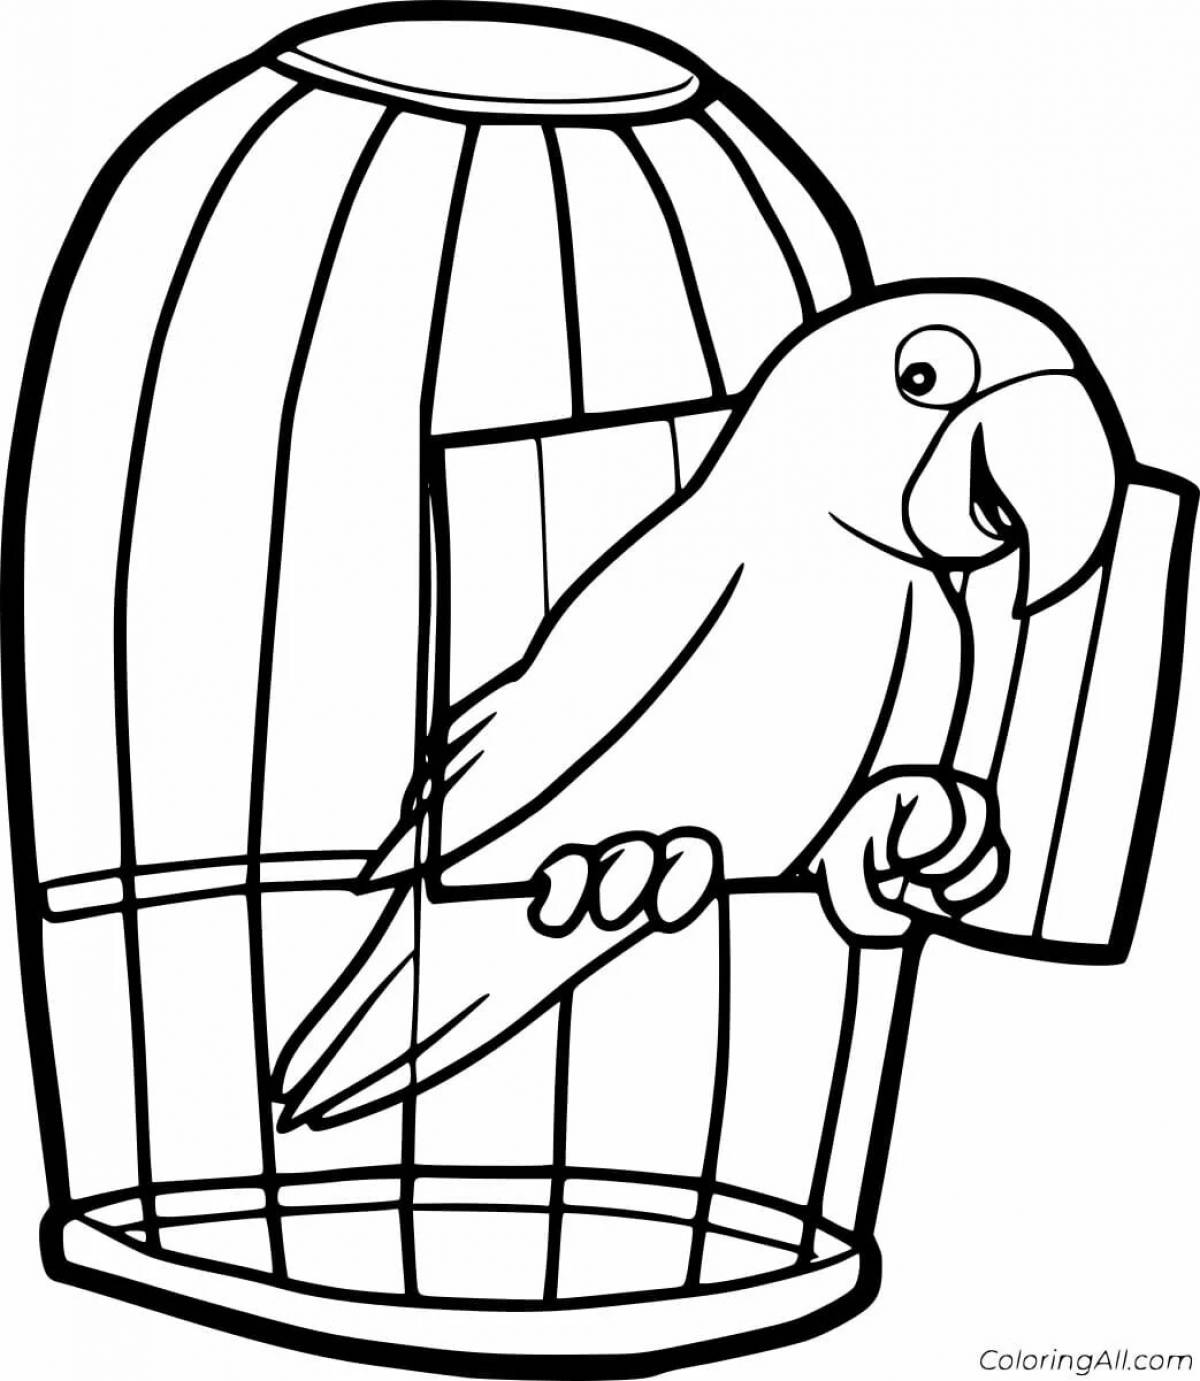 Caged parrot #11